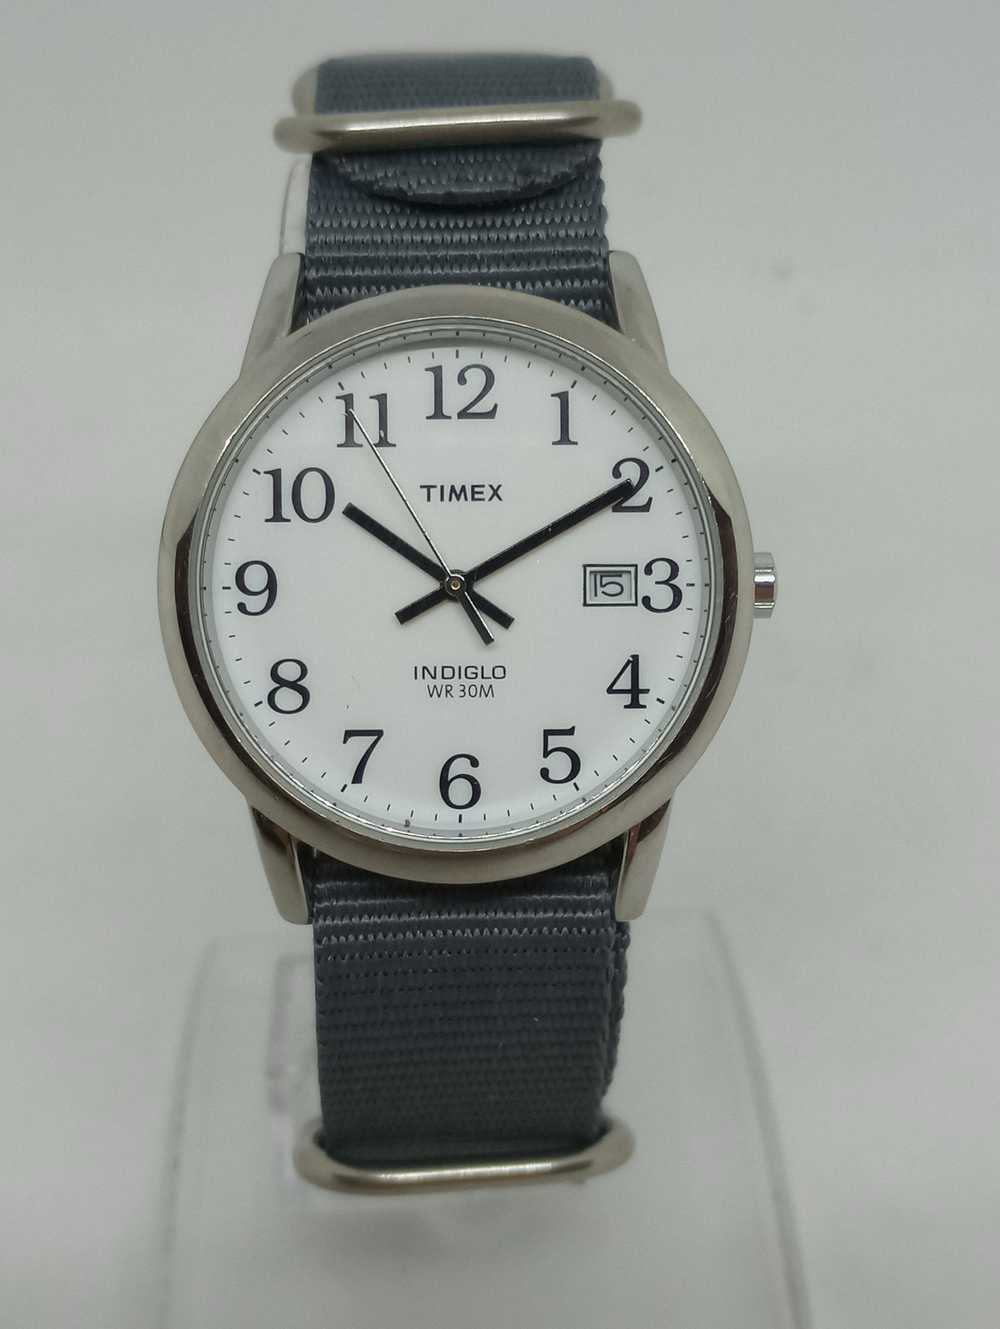 Timex Timex Indiglo 52R 35mm White Dial Date Watch - image 2